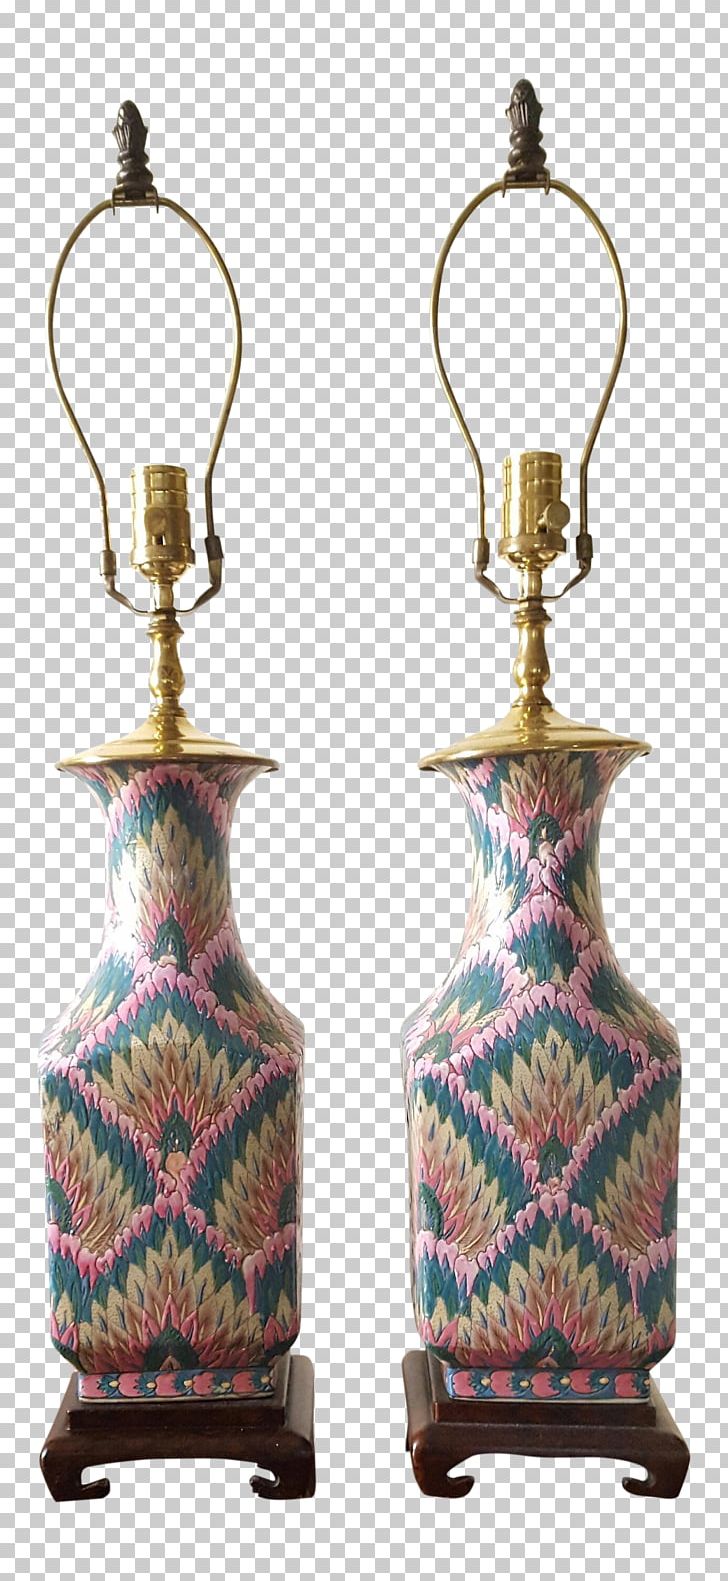 Vase 01504 Artifact PNG, Clipart, 01504, Artifact, Brass, Chinoiserie, Flowers Free PNG Download